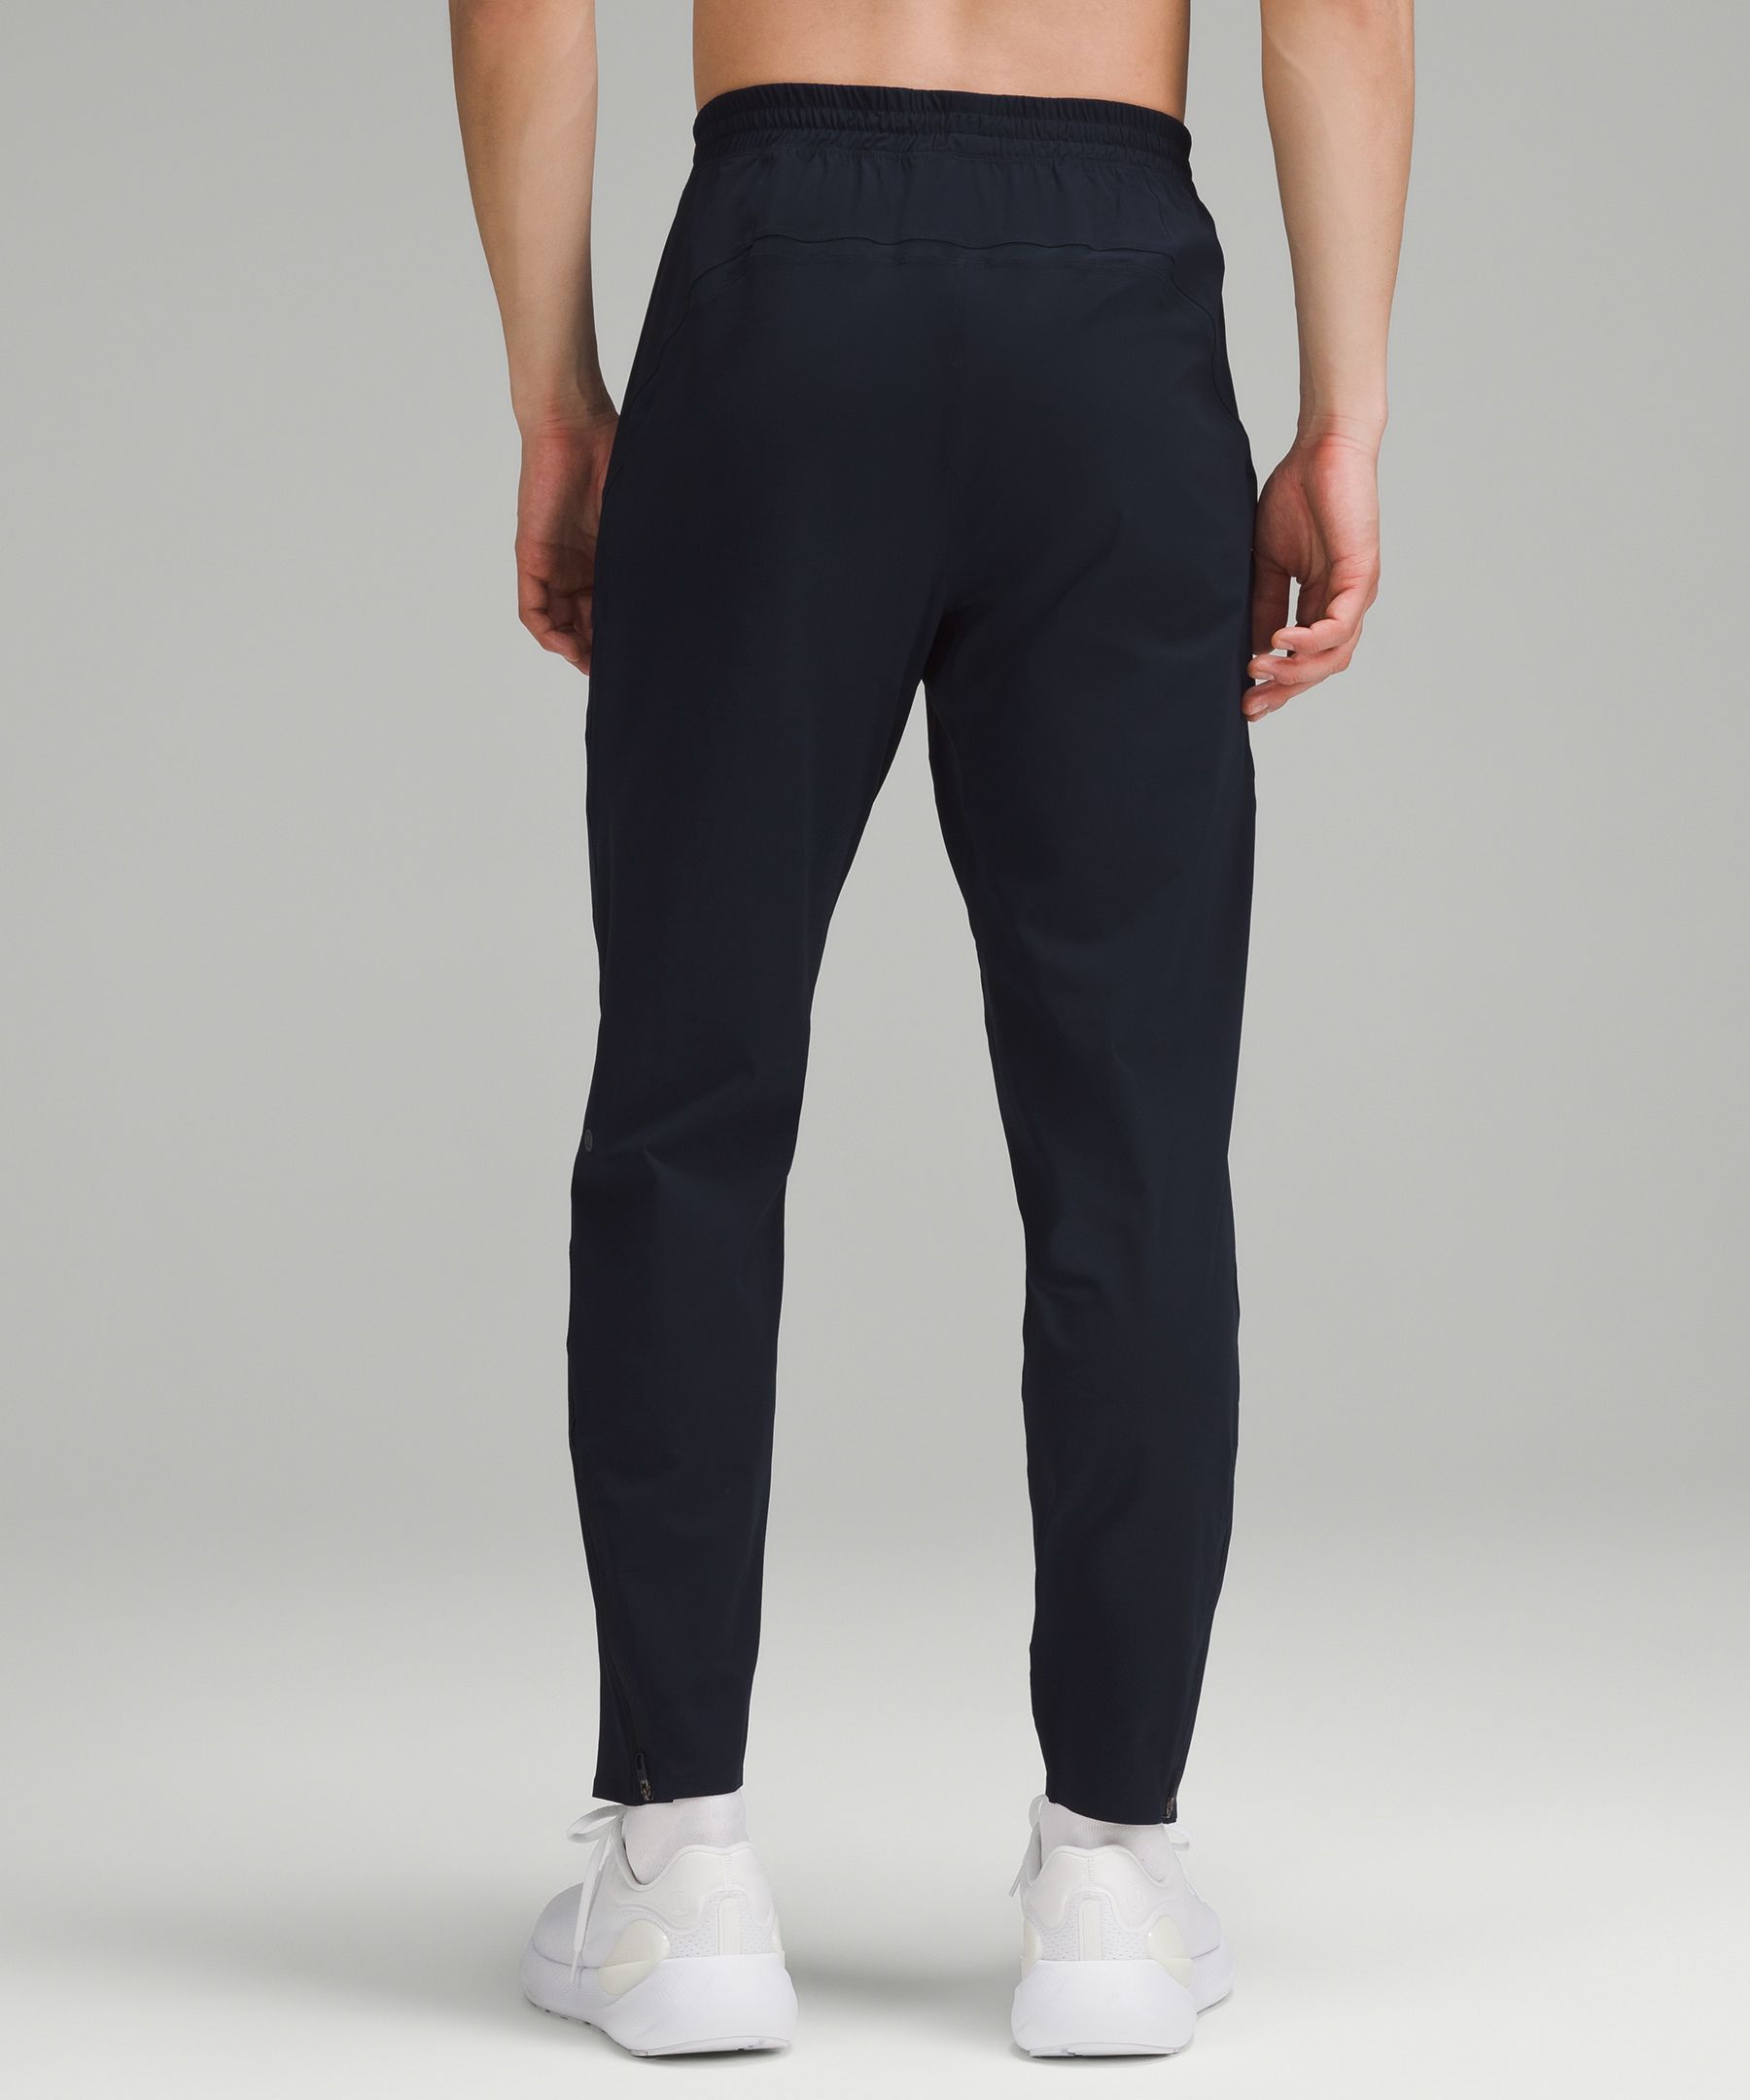 These Versatile $30 Joggers Are 'Comparable to Lululemon